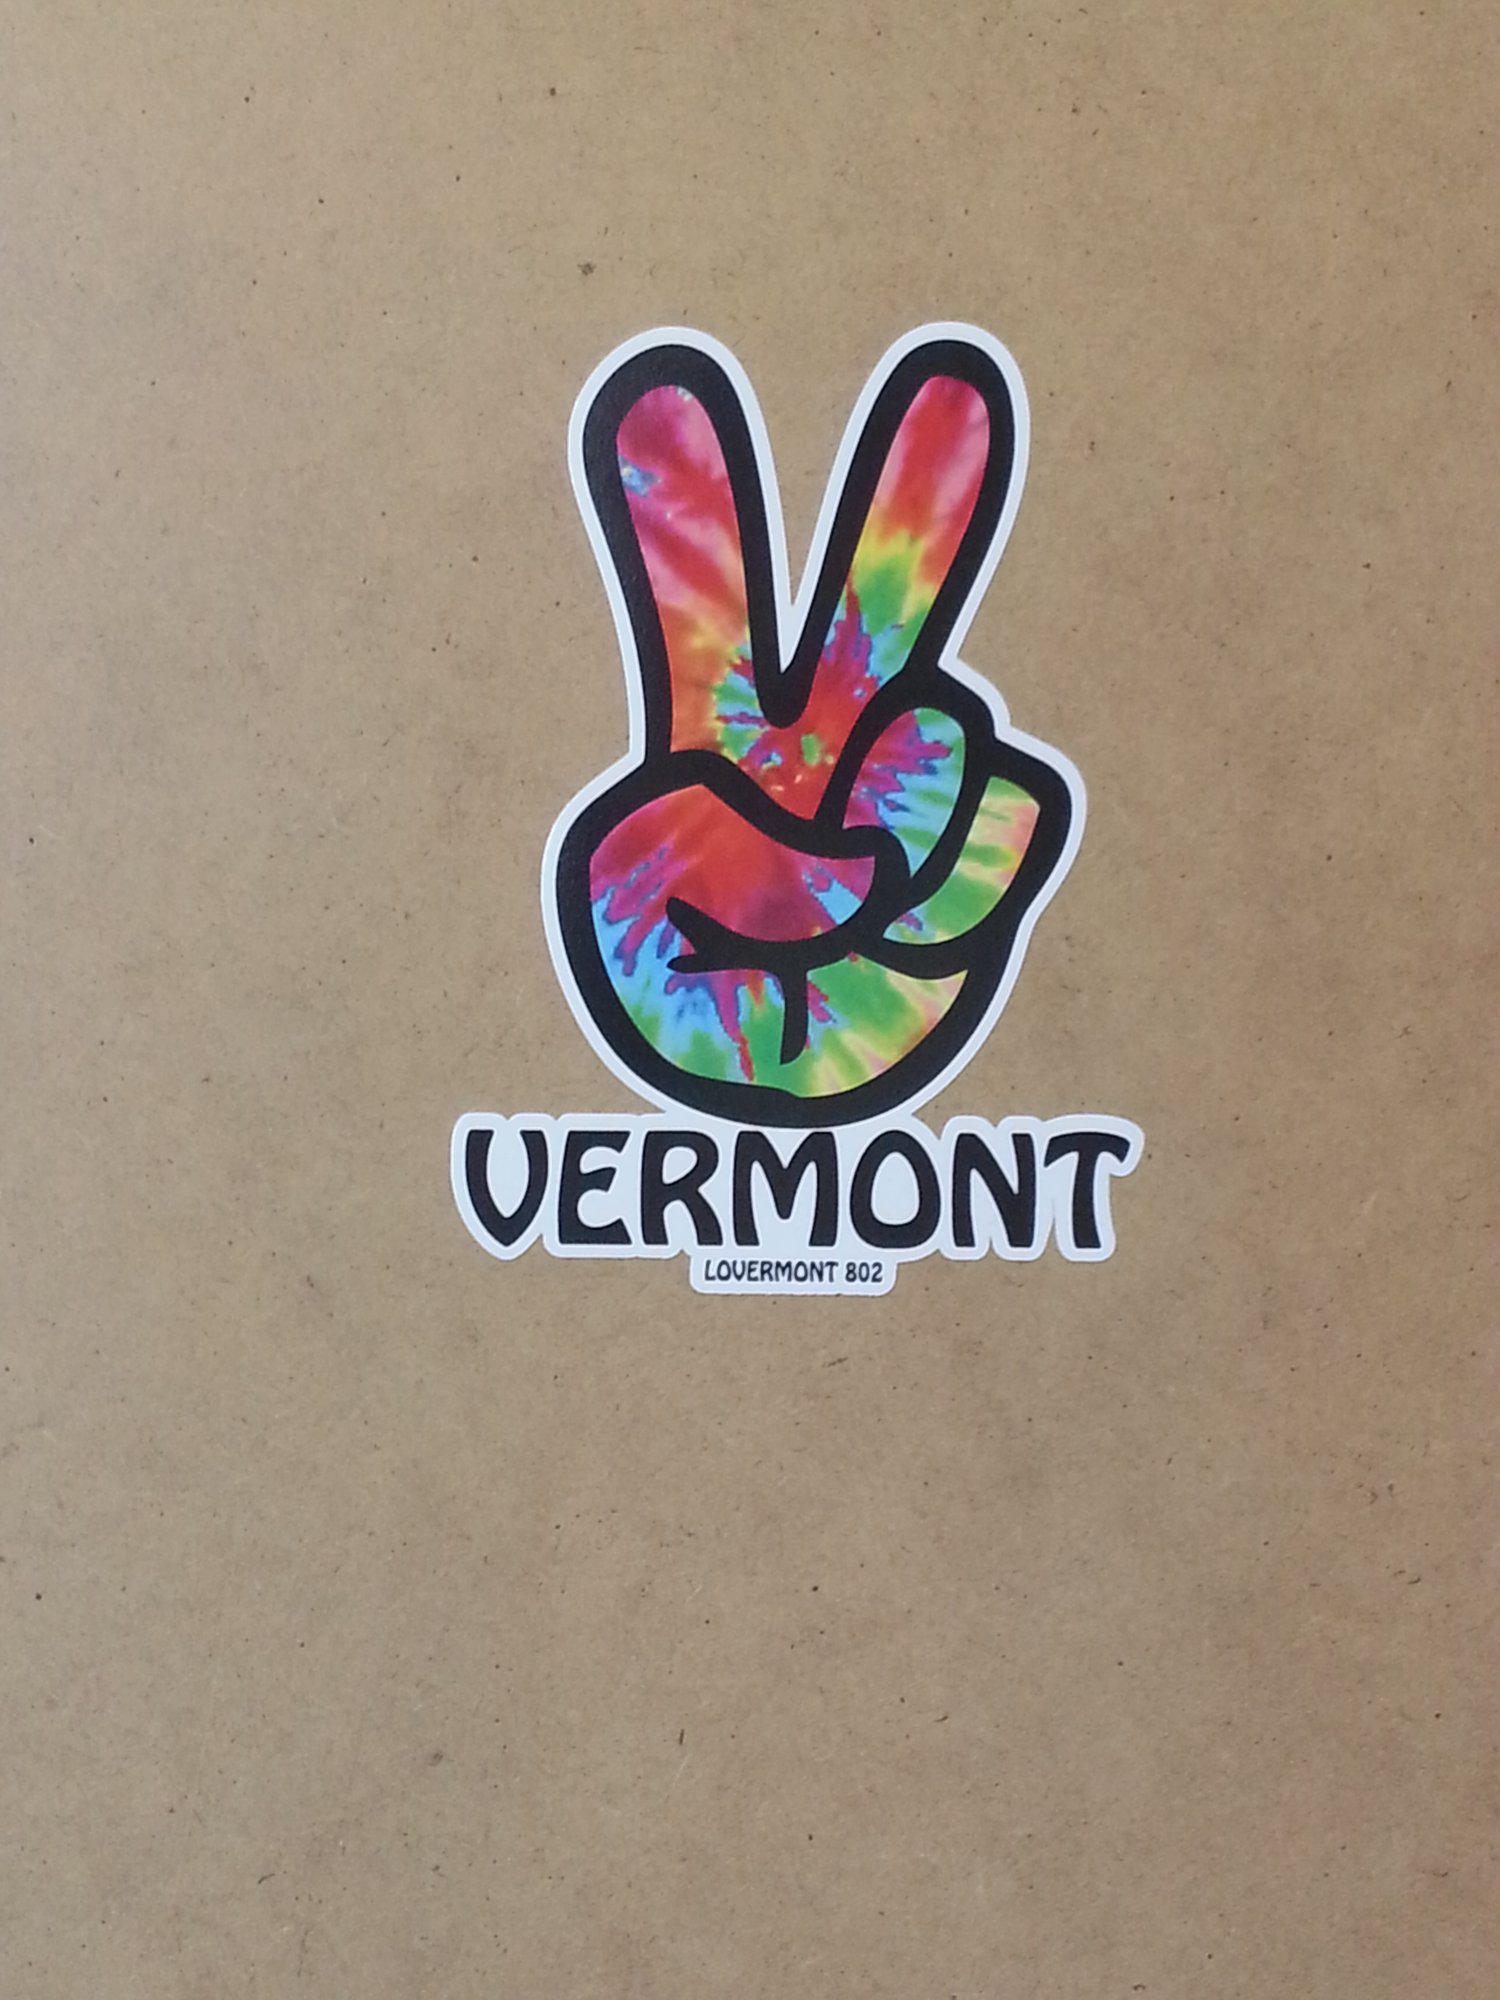 Image of Vermont Hand Full of Peace - Peace Sign Tie Dye Hand Sticker - Digital printed bumper decal